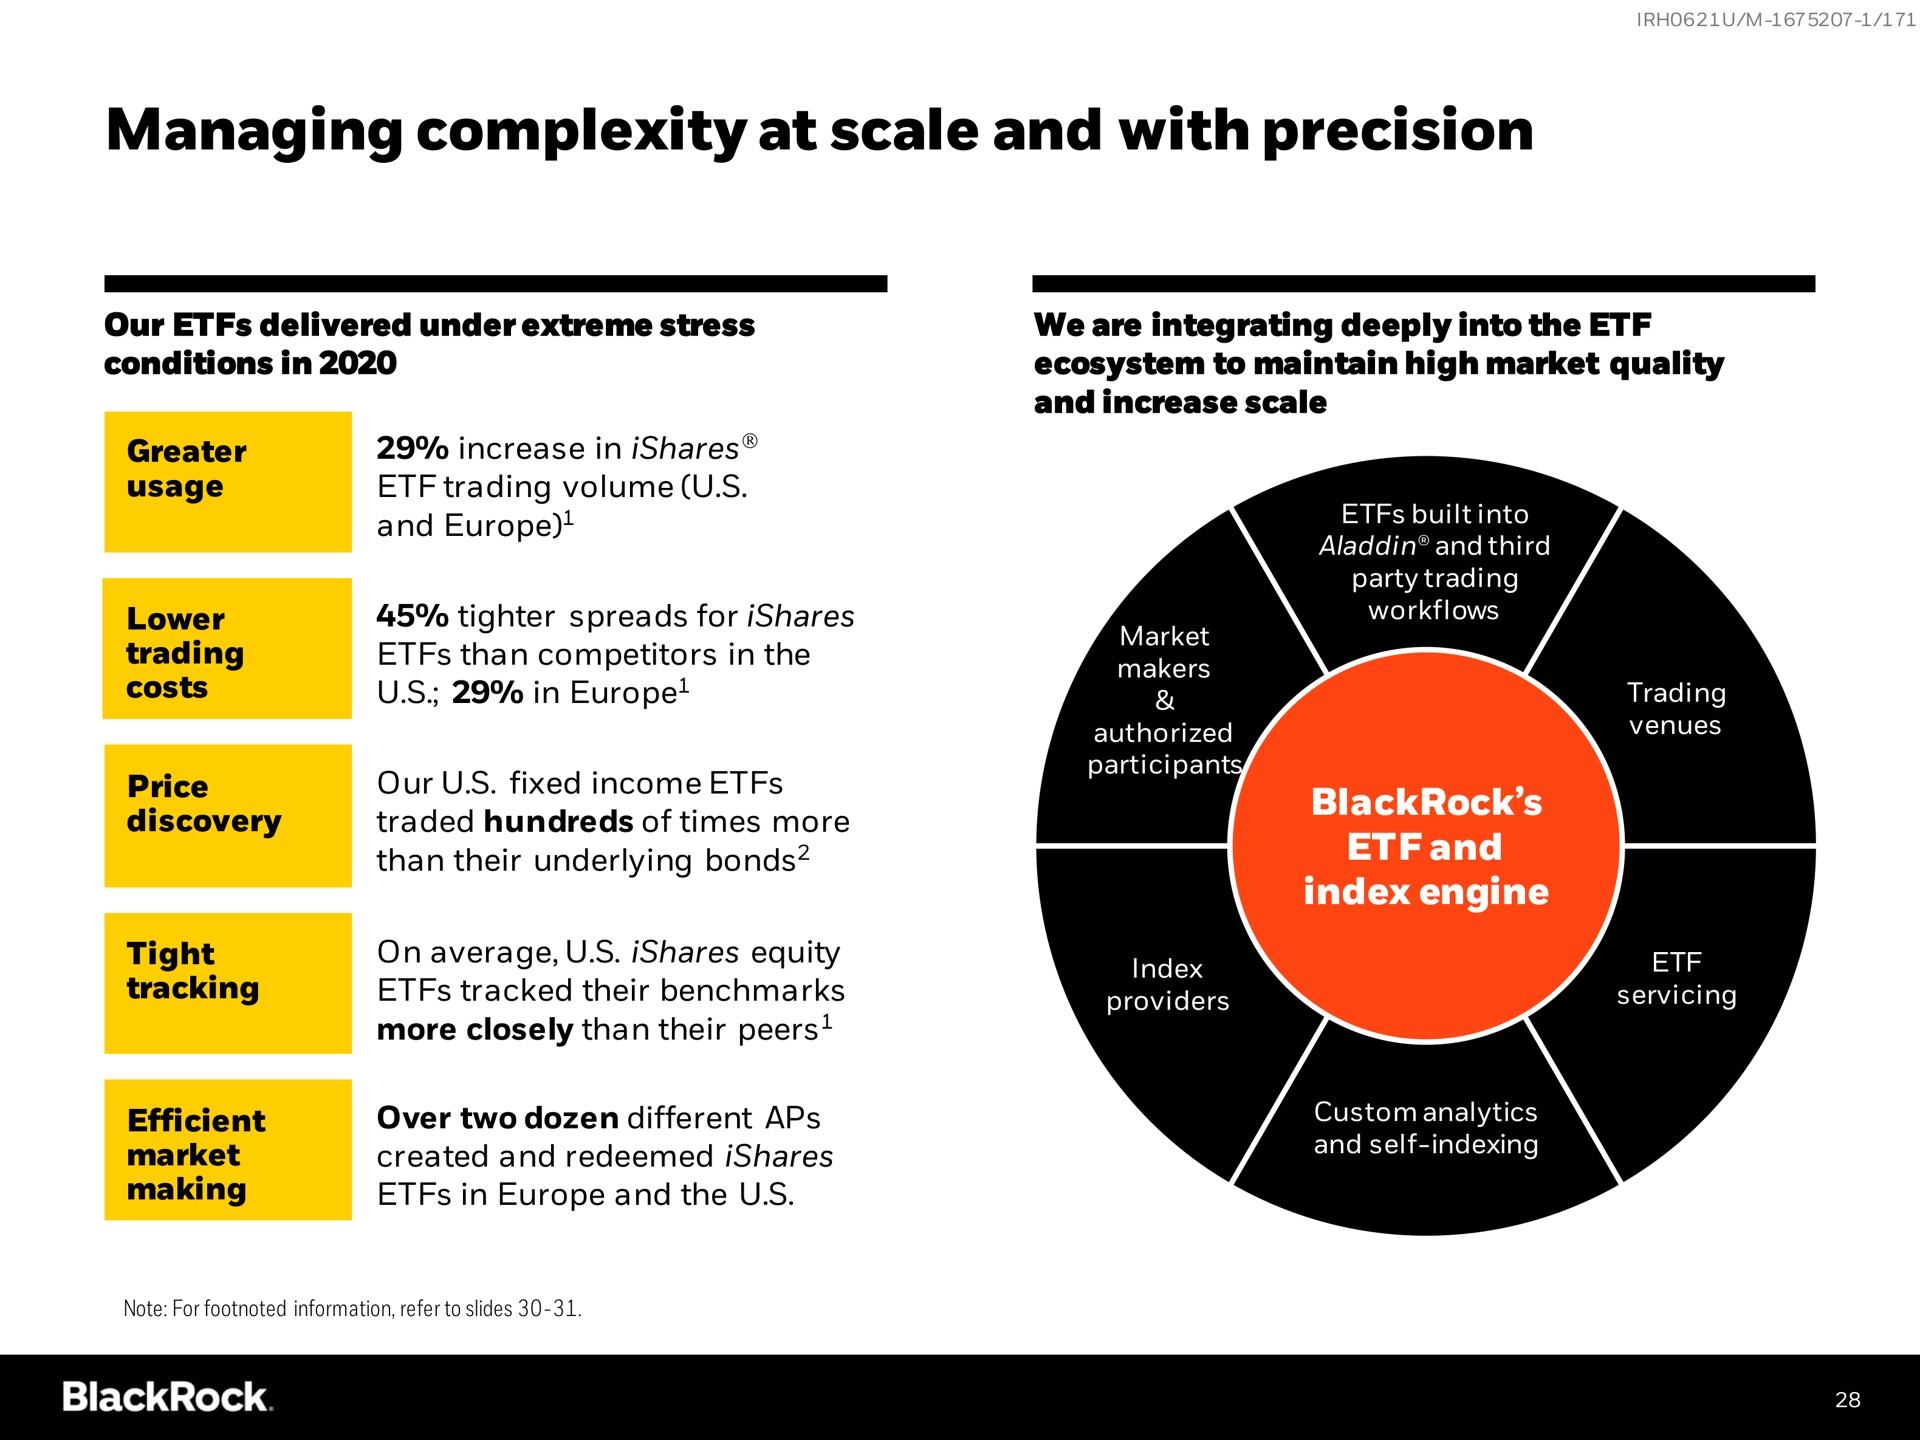 managing complexity at scale and with precision | BlackRock